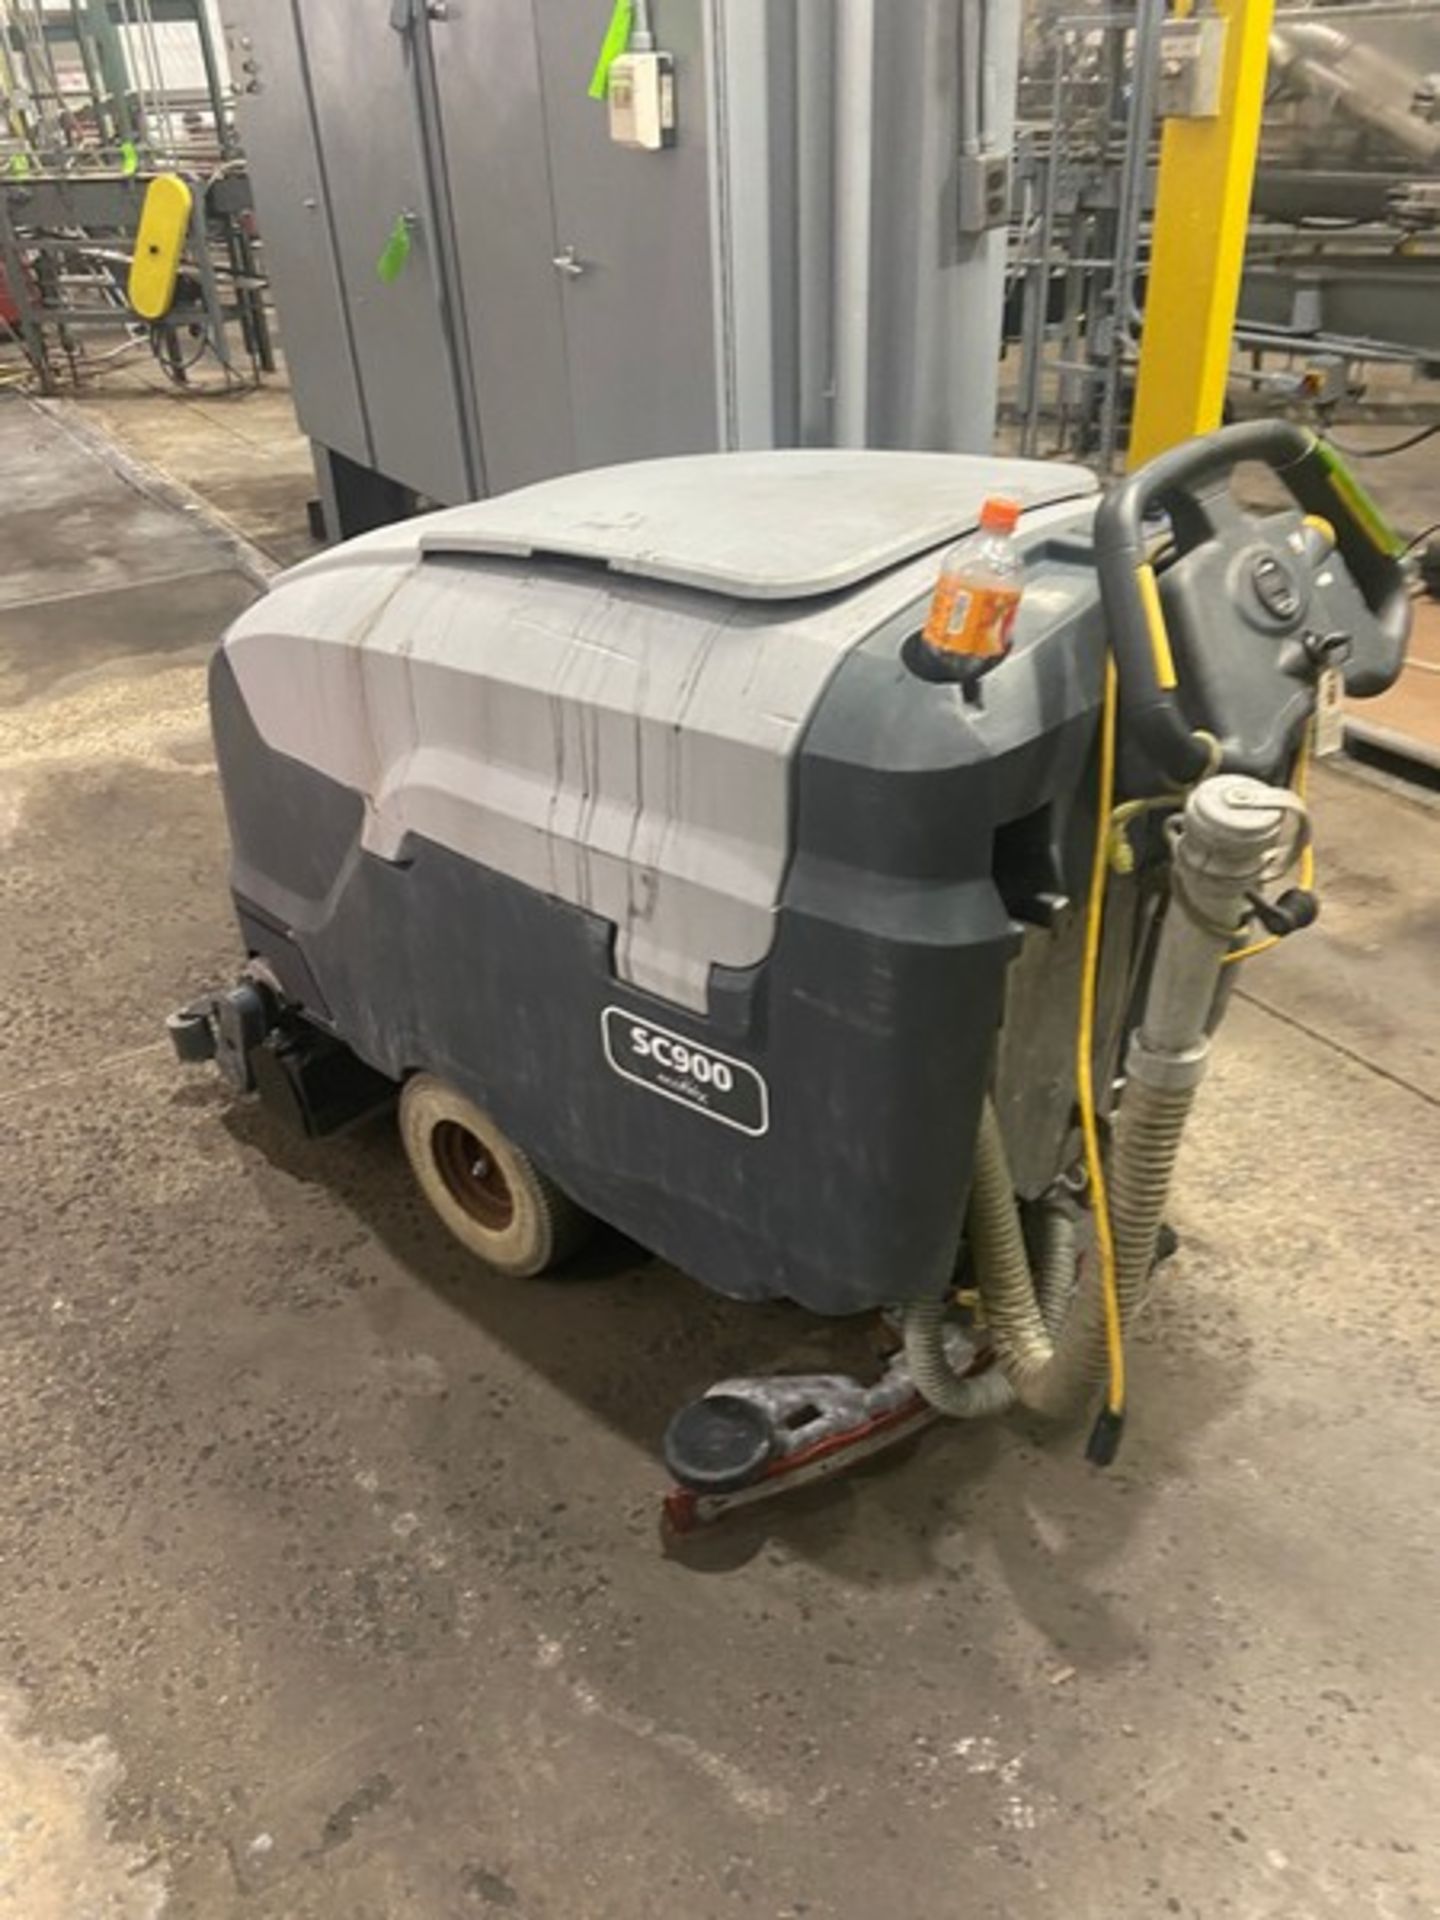 SC900 Walk Behind Floor Scrubber (LOCATED IN FREDERICK, MD) - Image 2 of 4